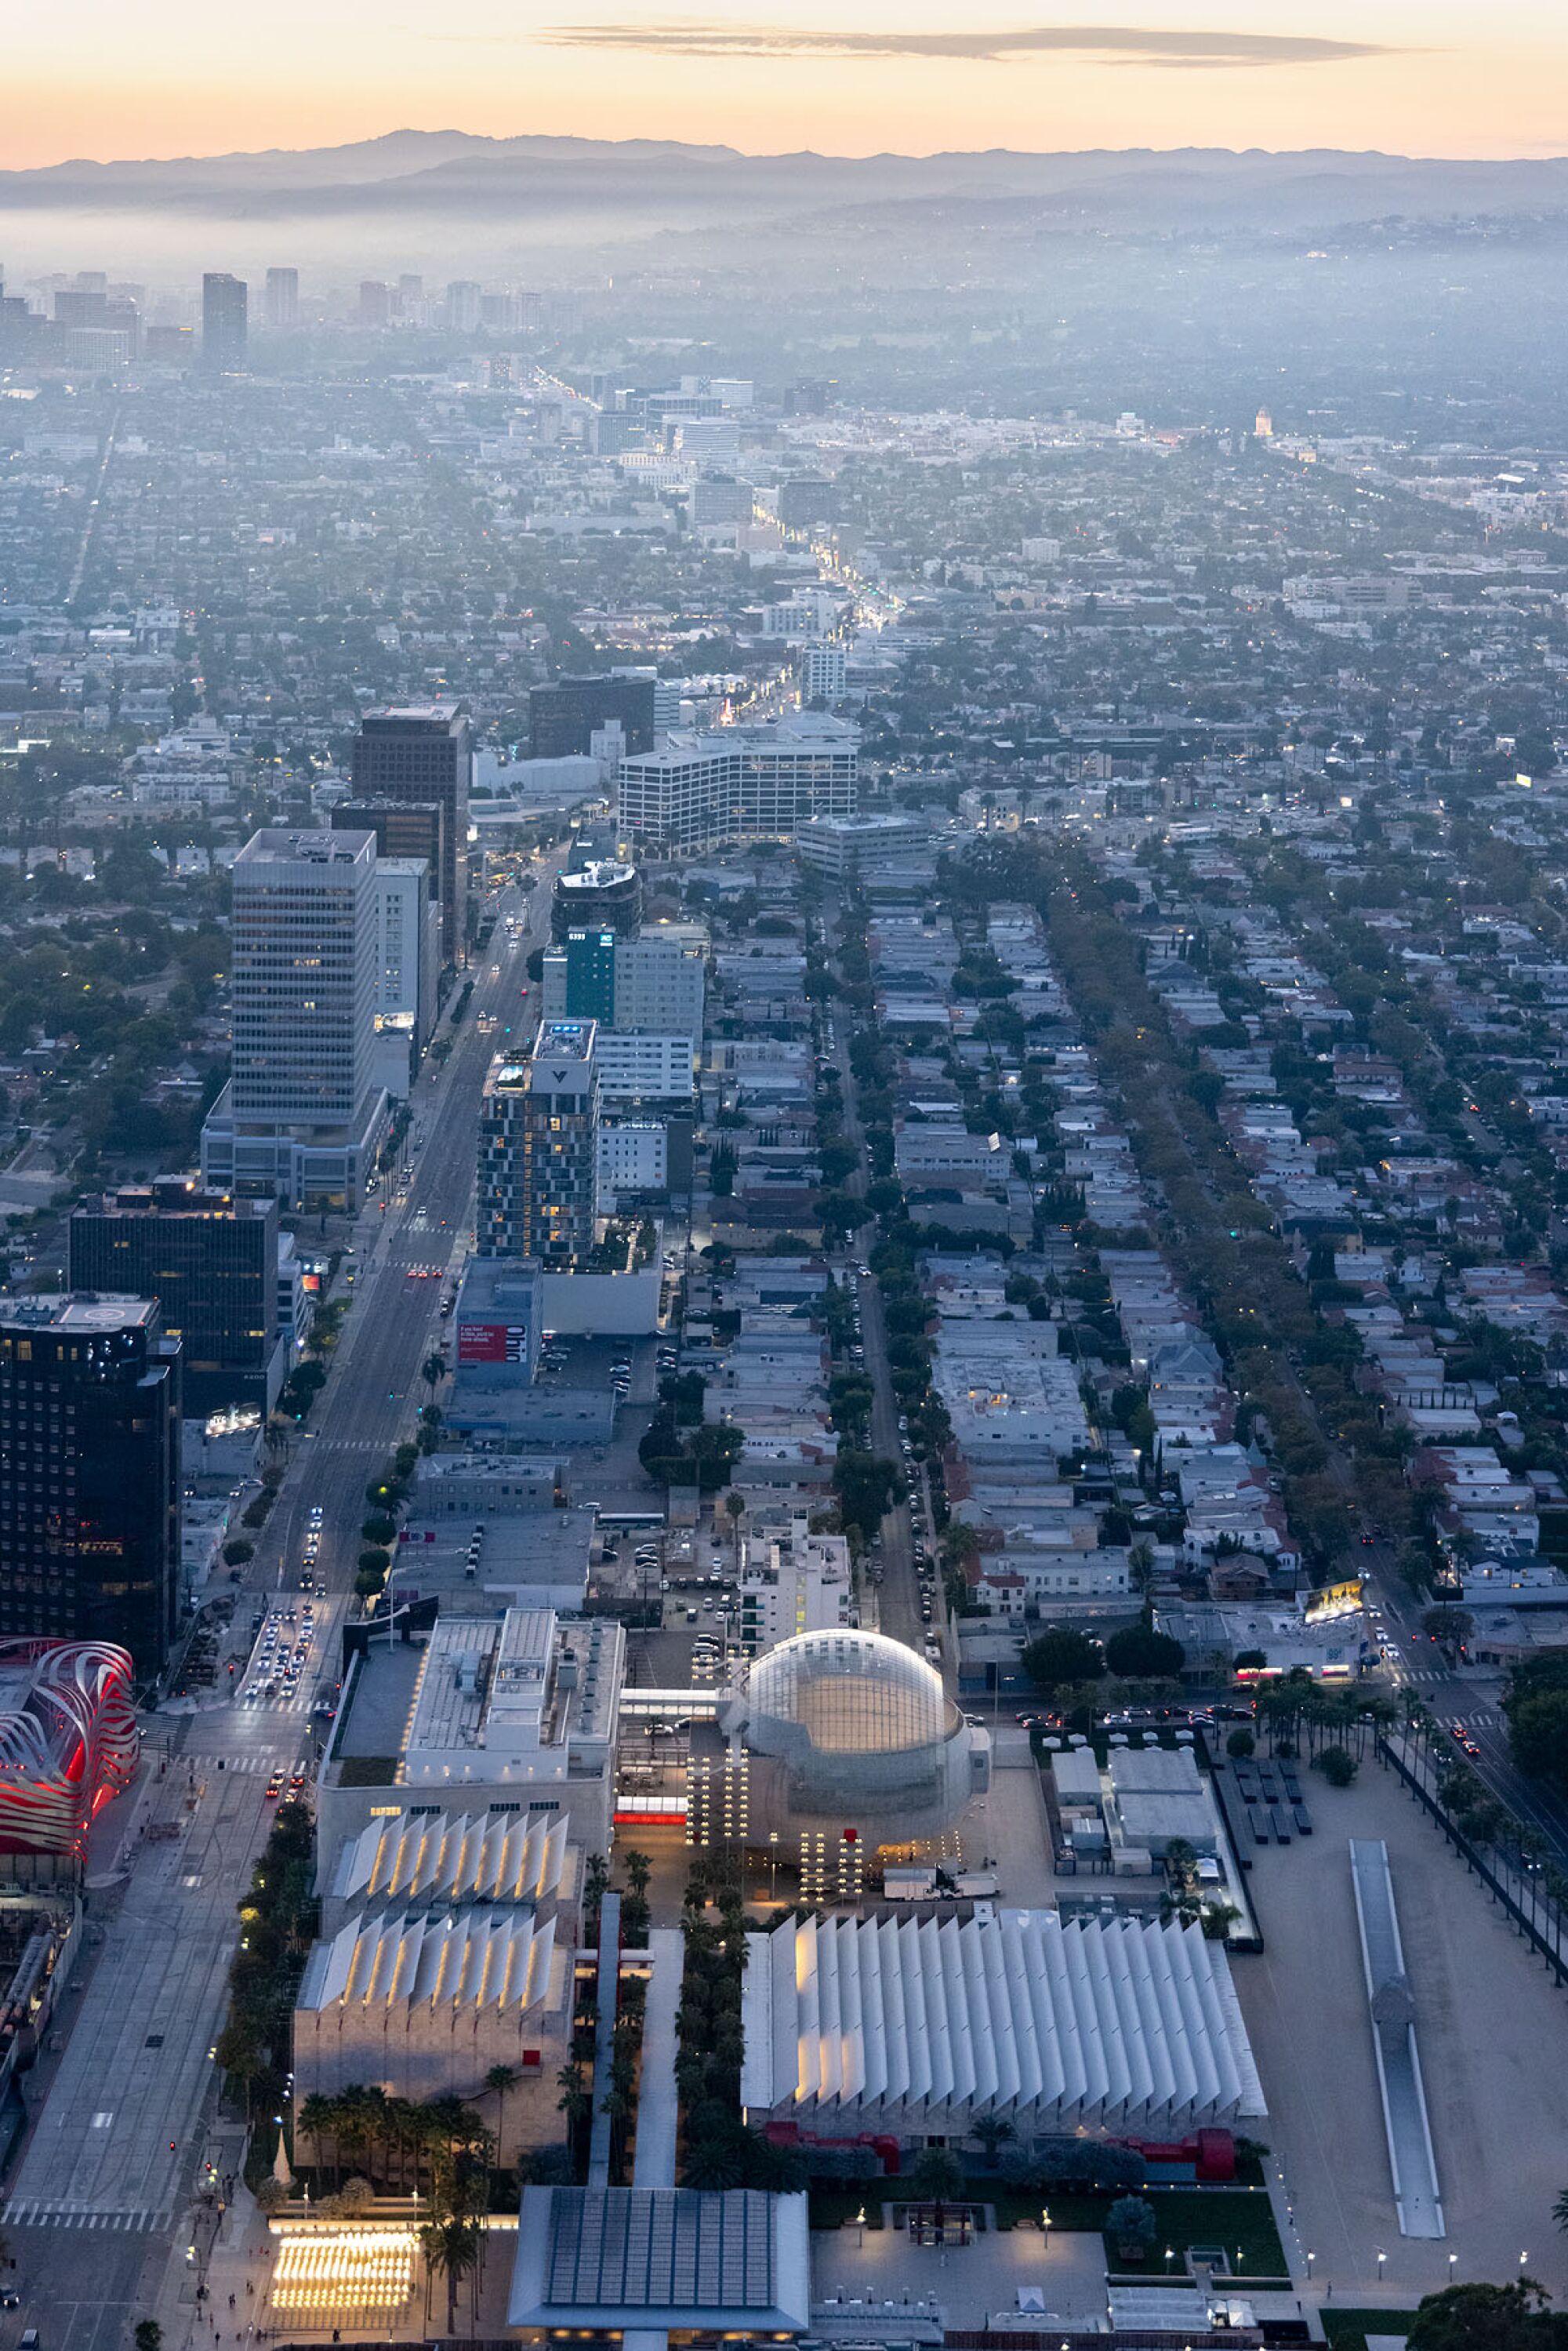 An aerial view of Los Angeles with mountains in the background